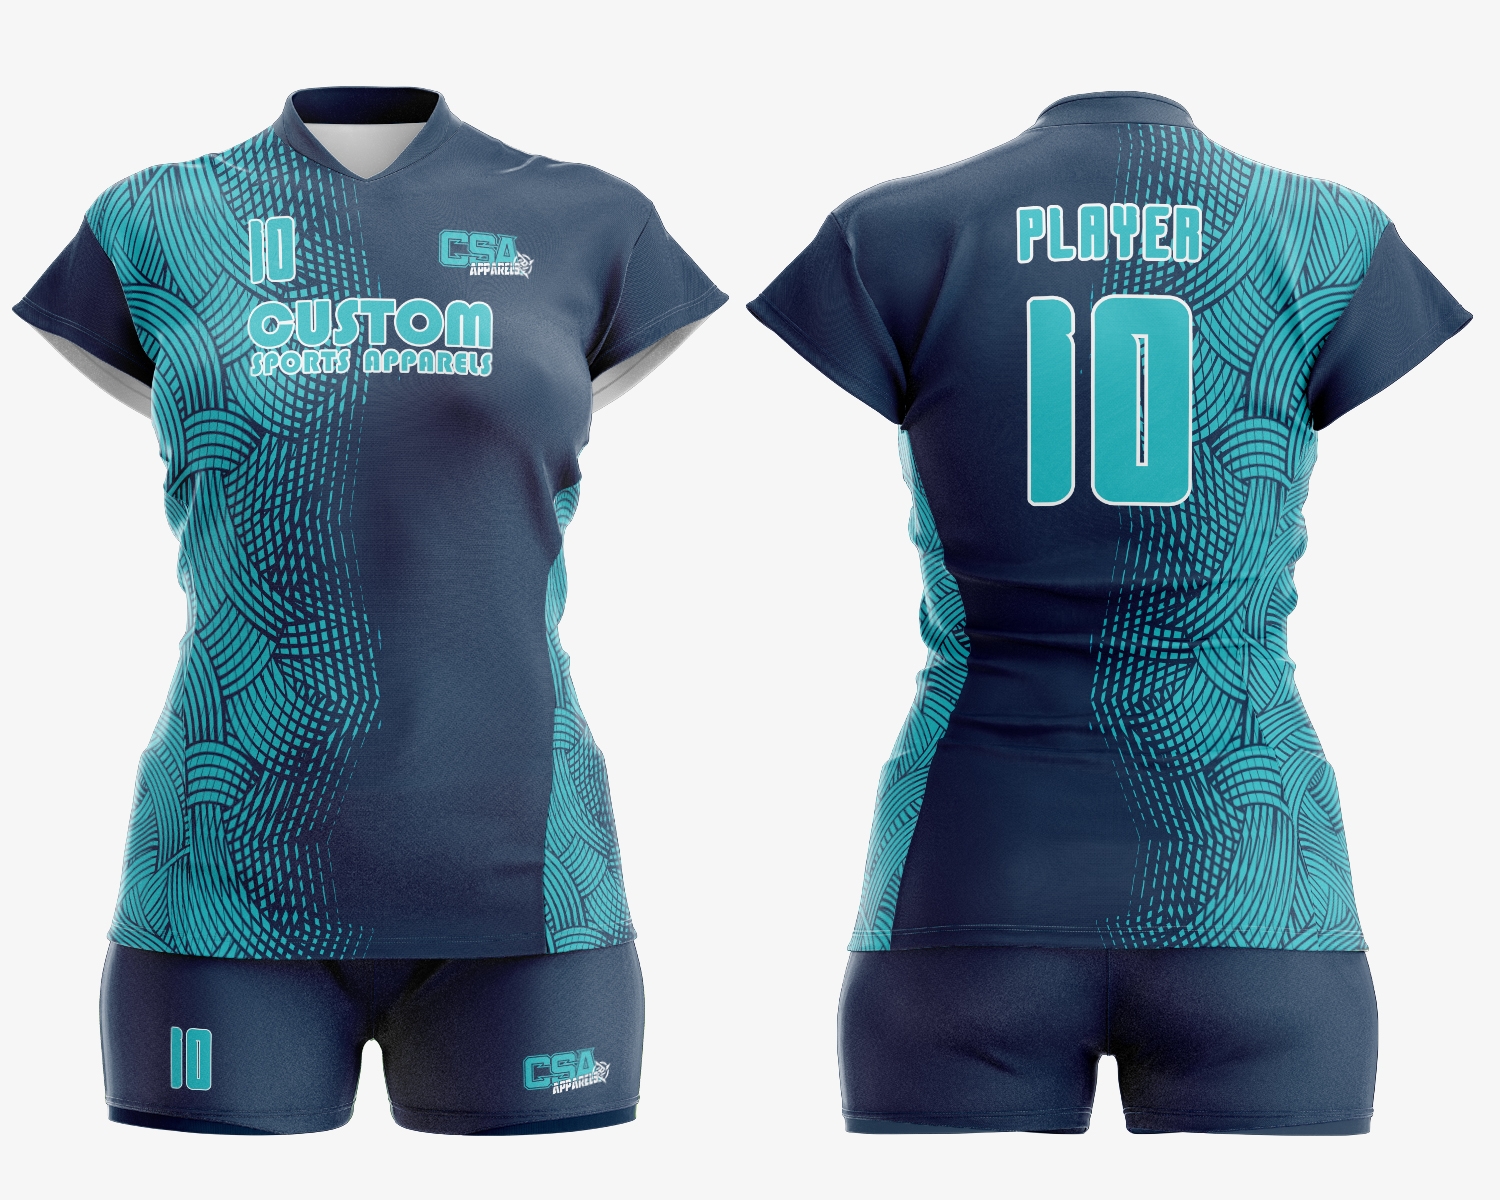 Full Sublimated Volleyball Team Uniform